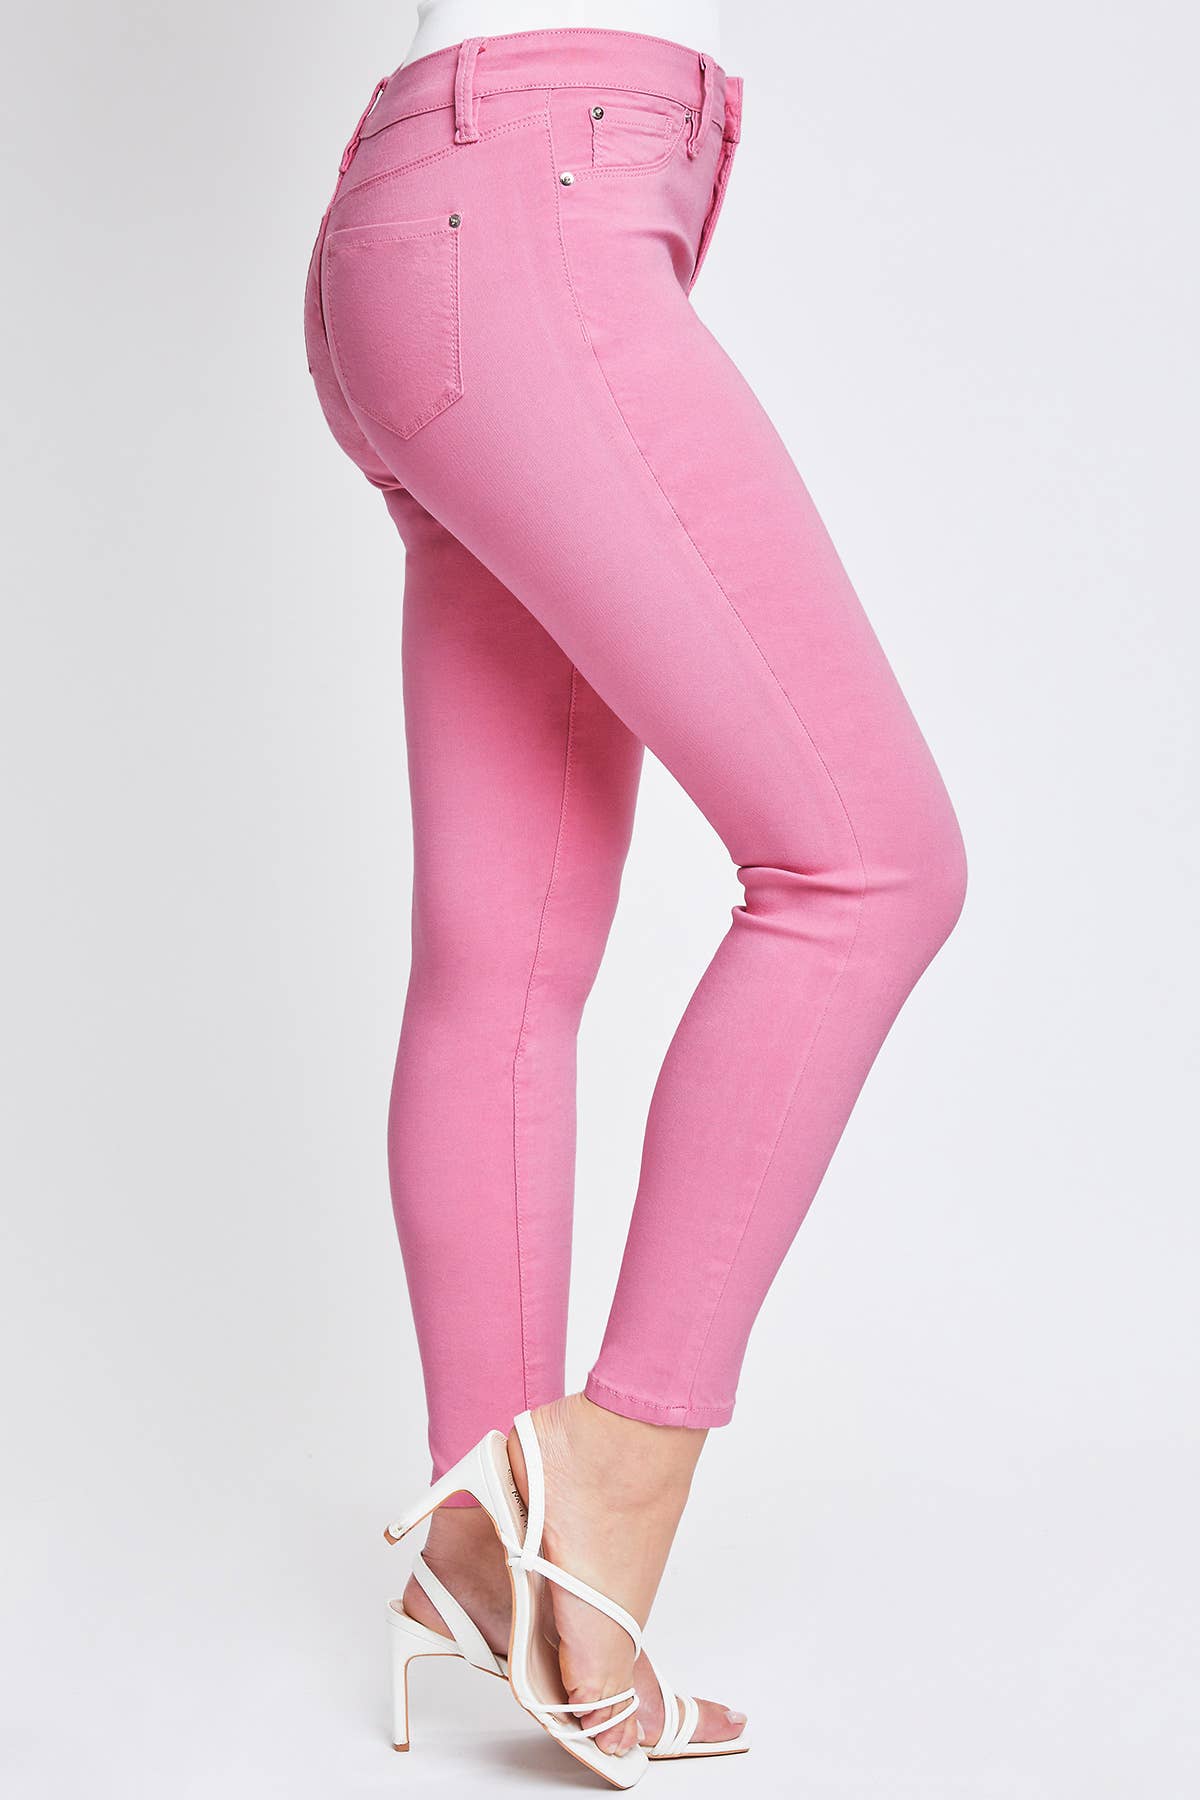 Hyperstretch Mid-Rise Skinny Jean: S / Junior / Shell Pink